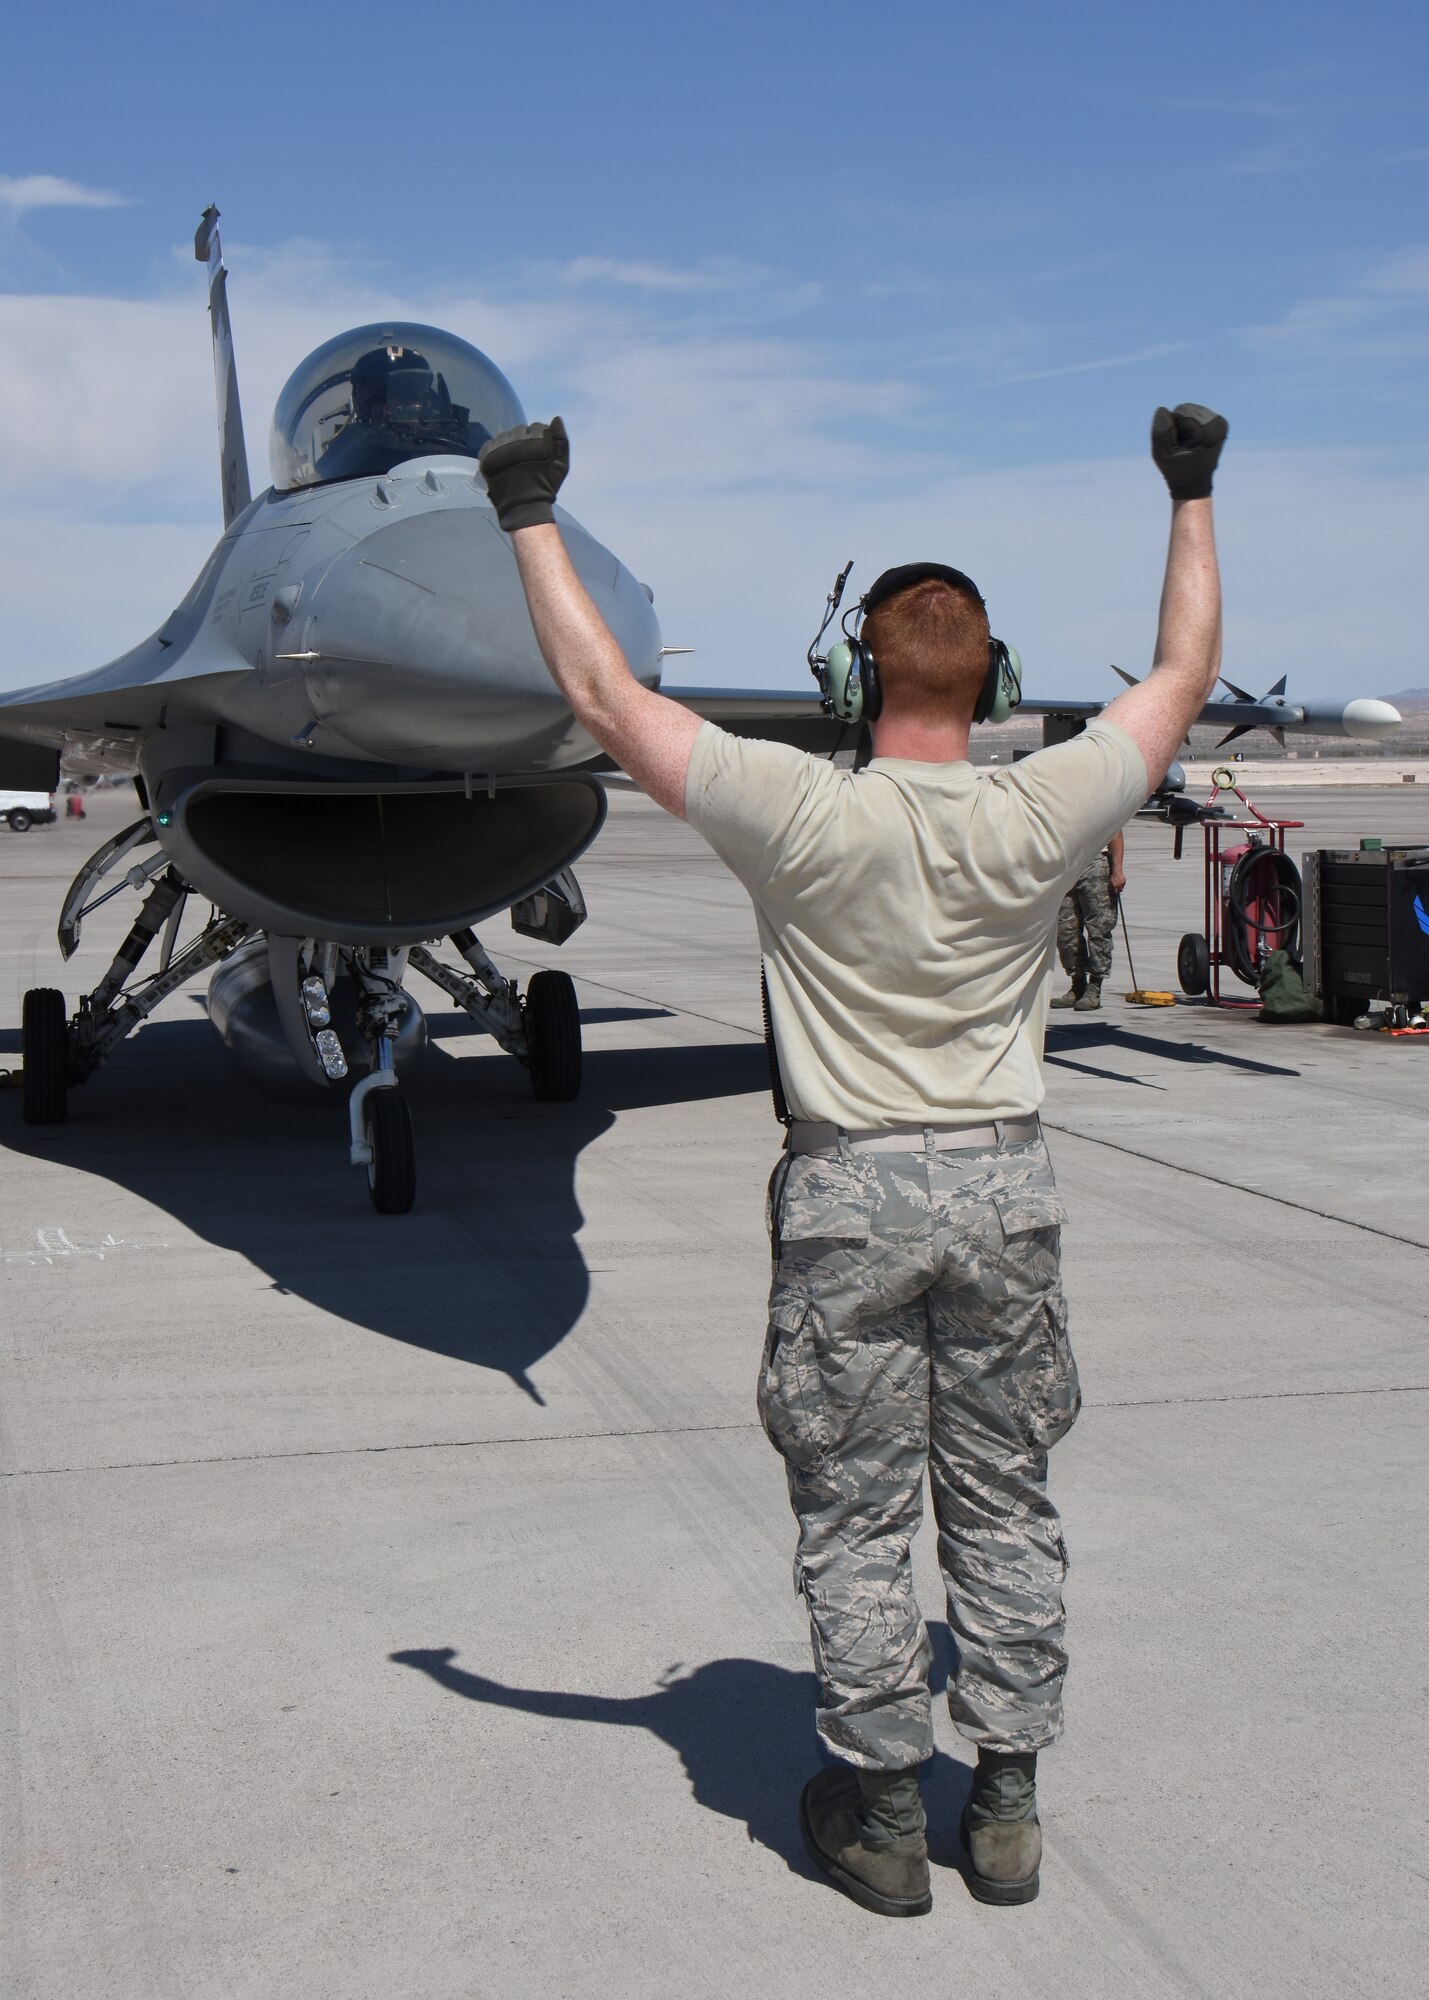 Airman 1st Class Nathan Moll, aircraft maintenance specialist with the 115th Fighter Wing in Madison, Wis., marshals an F-16 Fighting Falcon on the aircraft ramp at Nellis Air Force Base, Nev., April 4, 2016. The Wisconsin Air National Guard unit deployed more than 100 Airmen and eight F-16 Fighting Falcons for two weeks to support advanced training in weapons and tactics employment at the United States Air Force Weapons School. (U.S. Air National Guard photo by Master Sgt. Paul Gorman/Released)